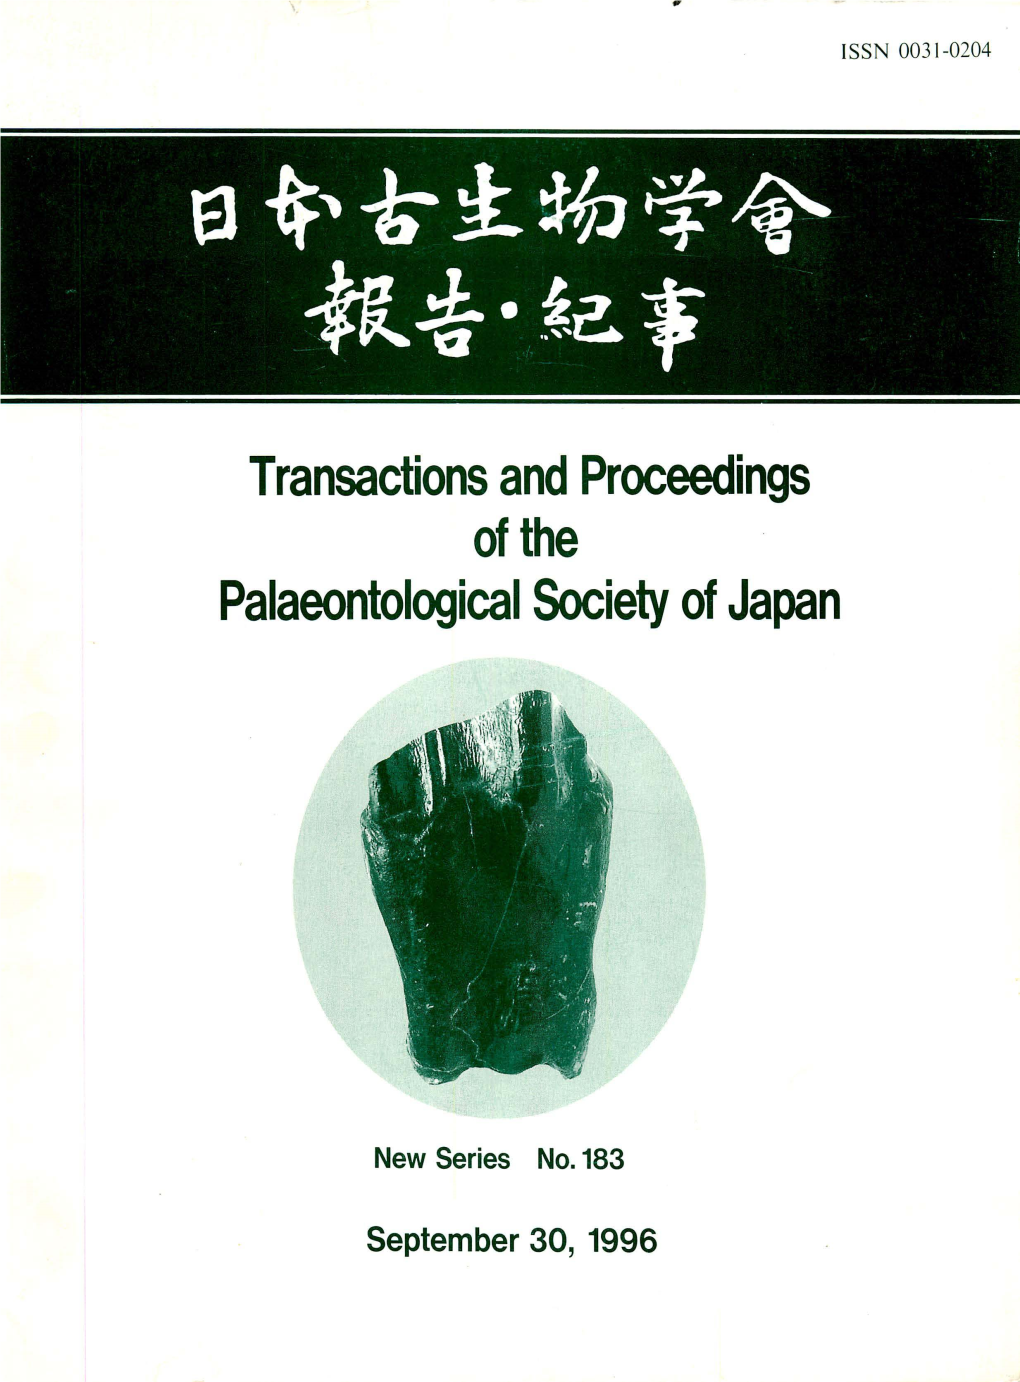 Transactions and Proceedings of the Palaeontological Society of Japan